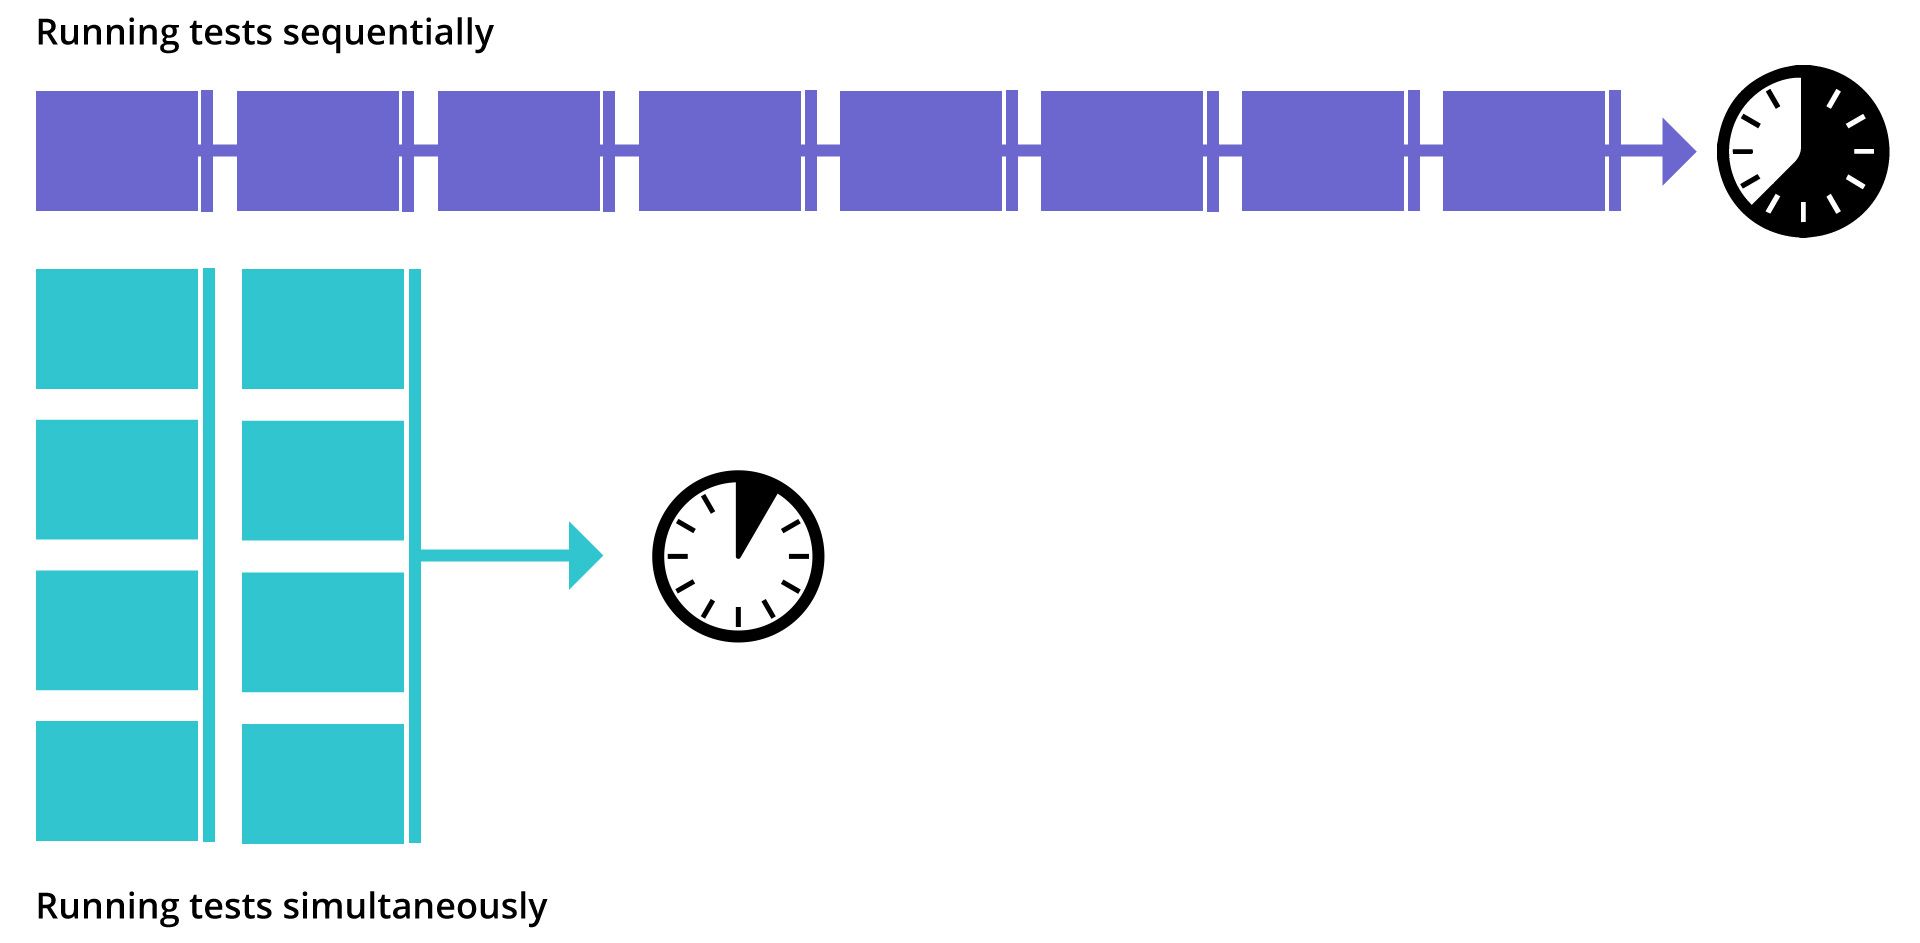 A diagram showing the difference in time it takes to run tests sequentially compared to running tests simultaneously.